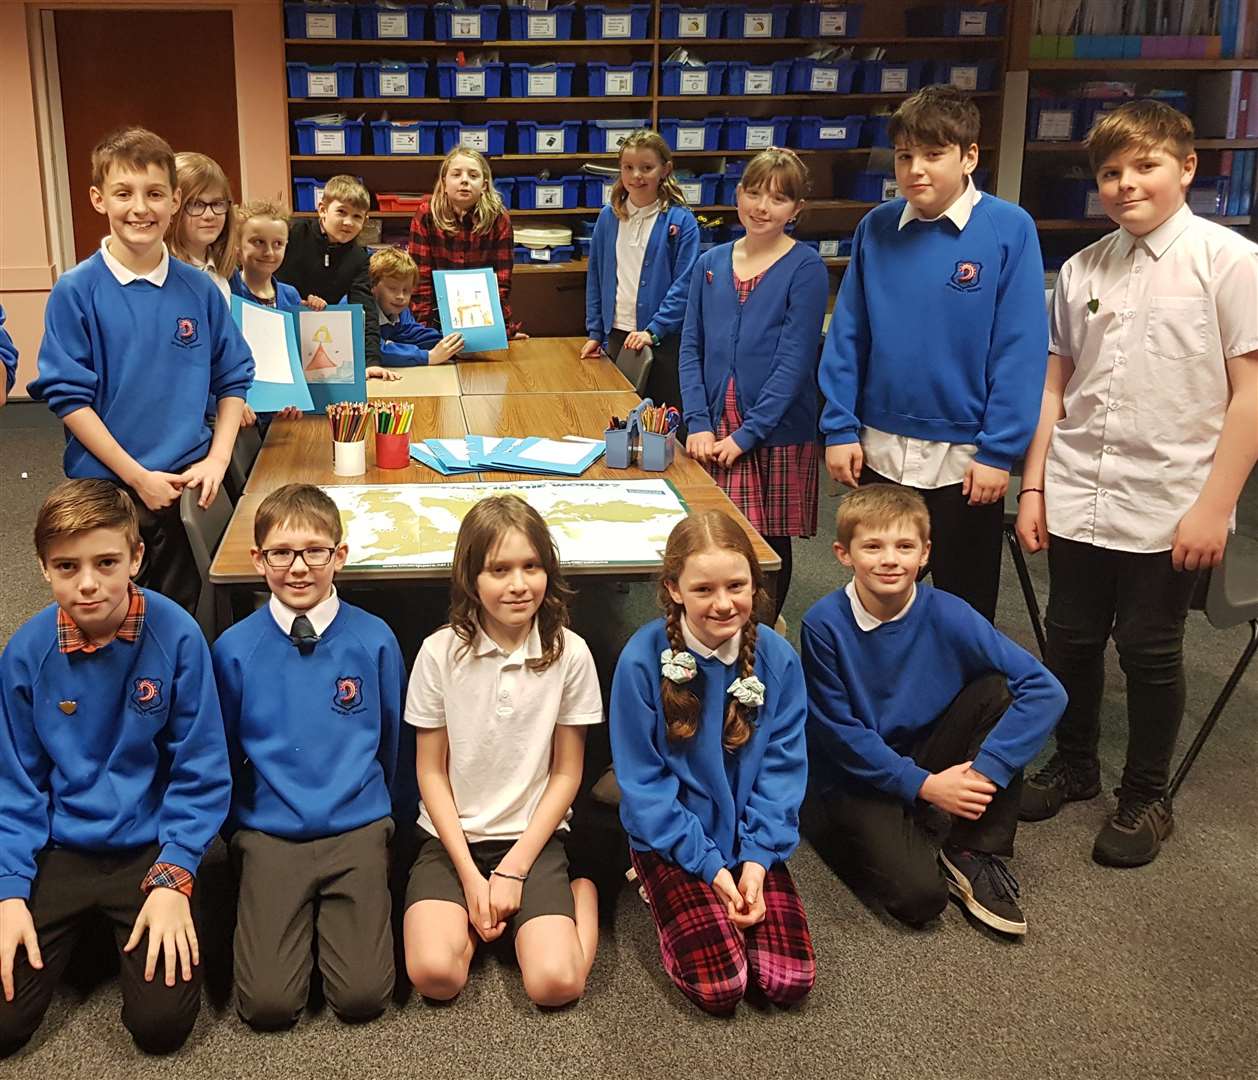 Hythehill Primary School's pupils benefitting from the military wellbeing scheme.